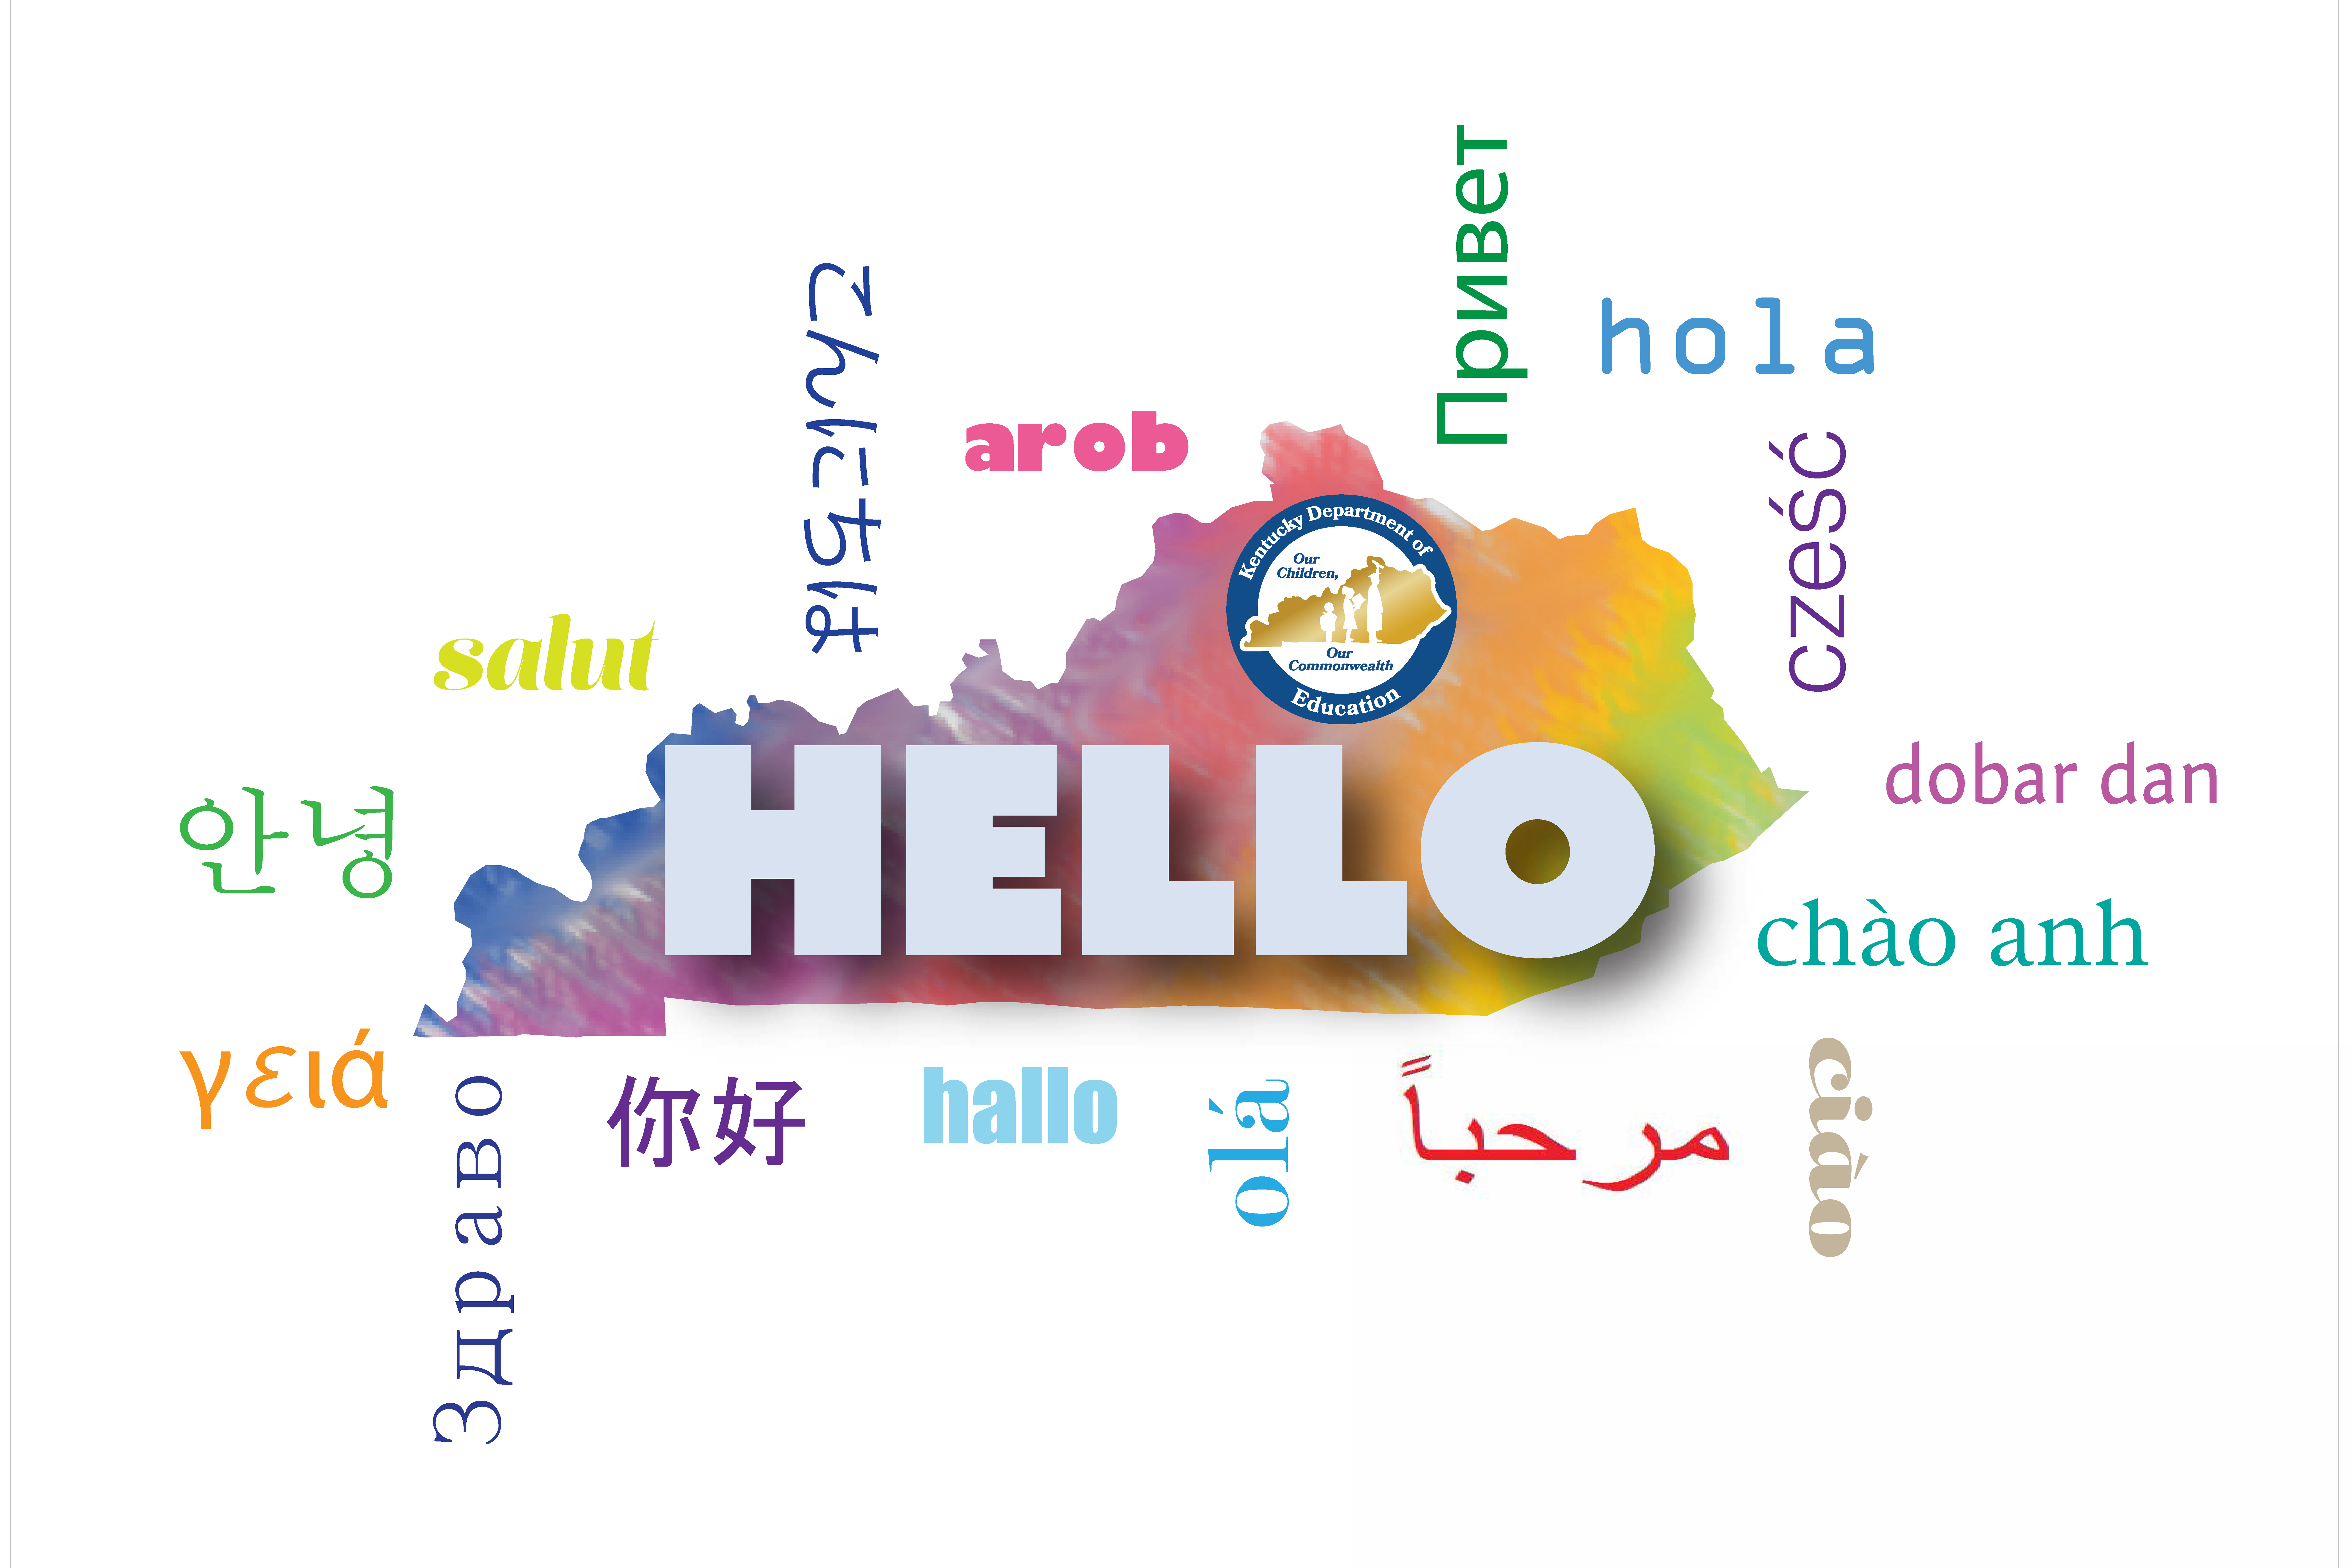 An image of Kentucky with a large "Hello" and greetings in other languages surrounding